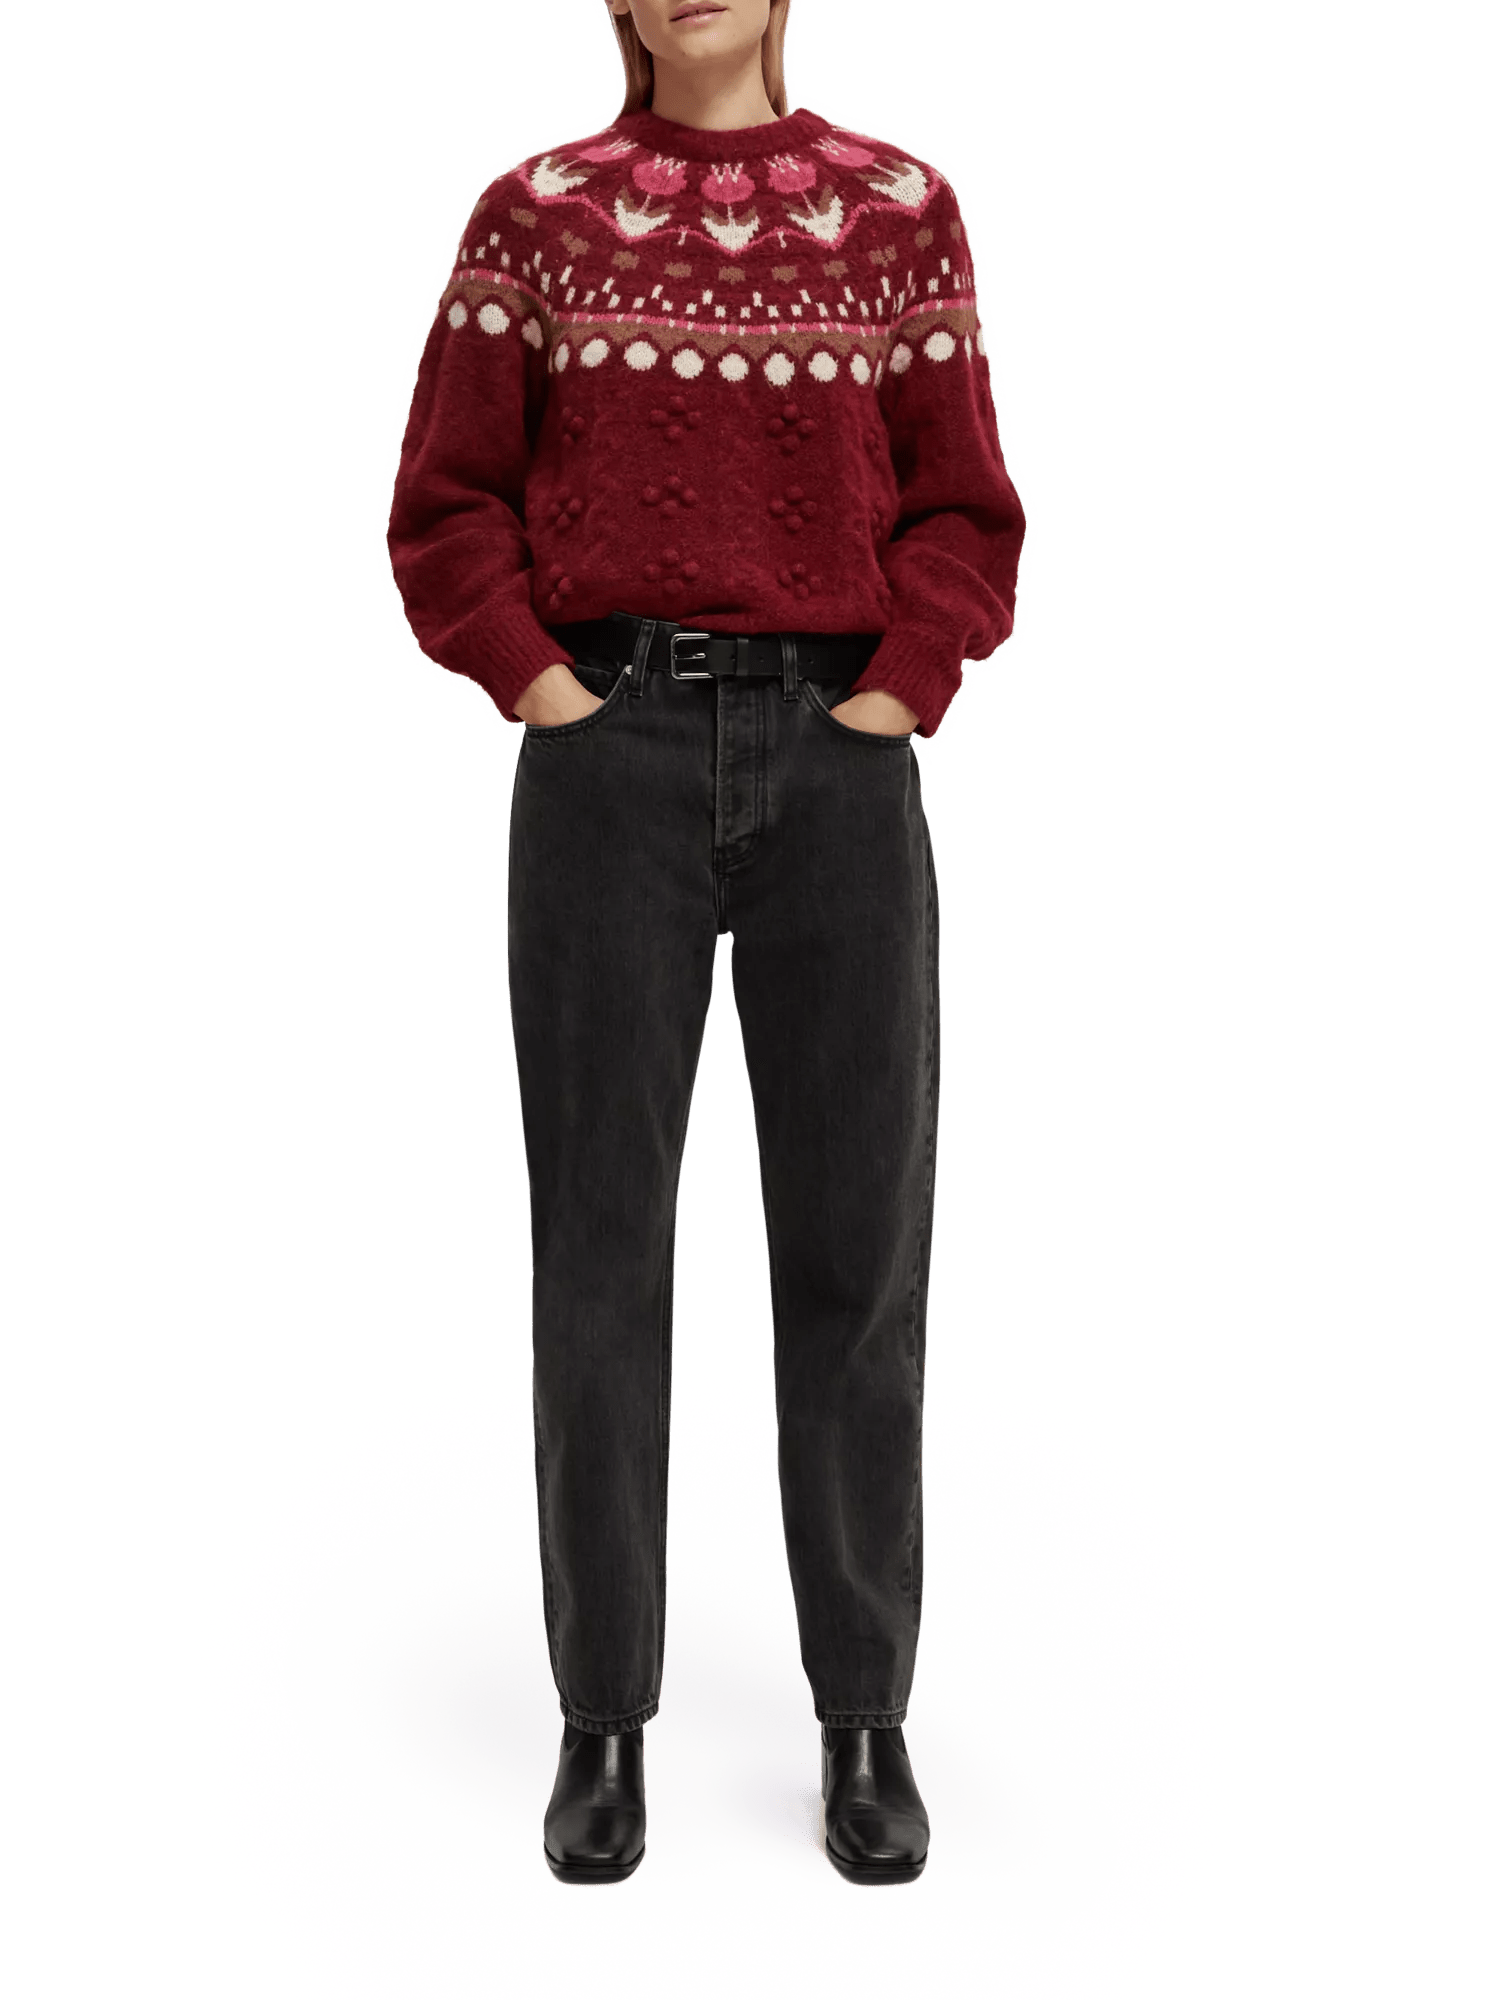 Glen Cable Knit Sweater - Whisky